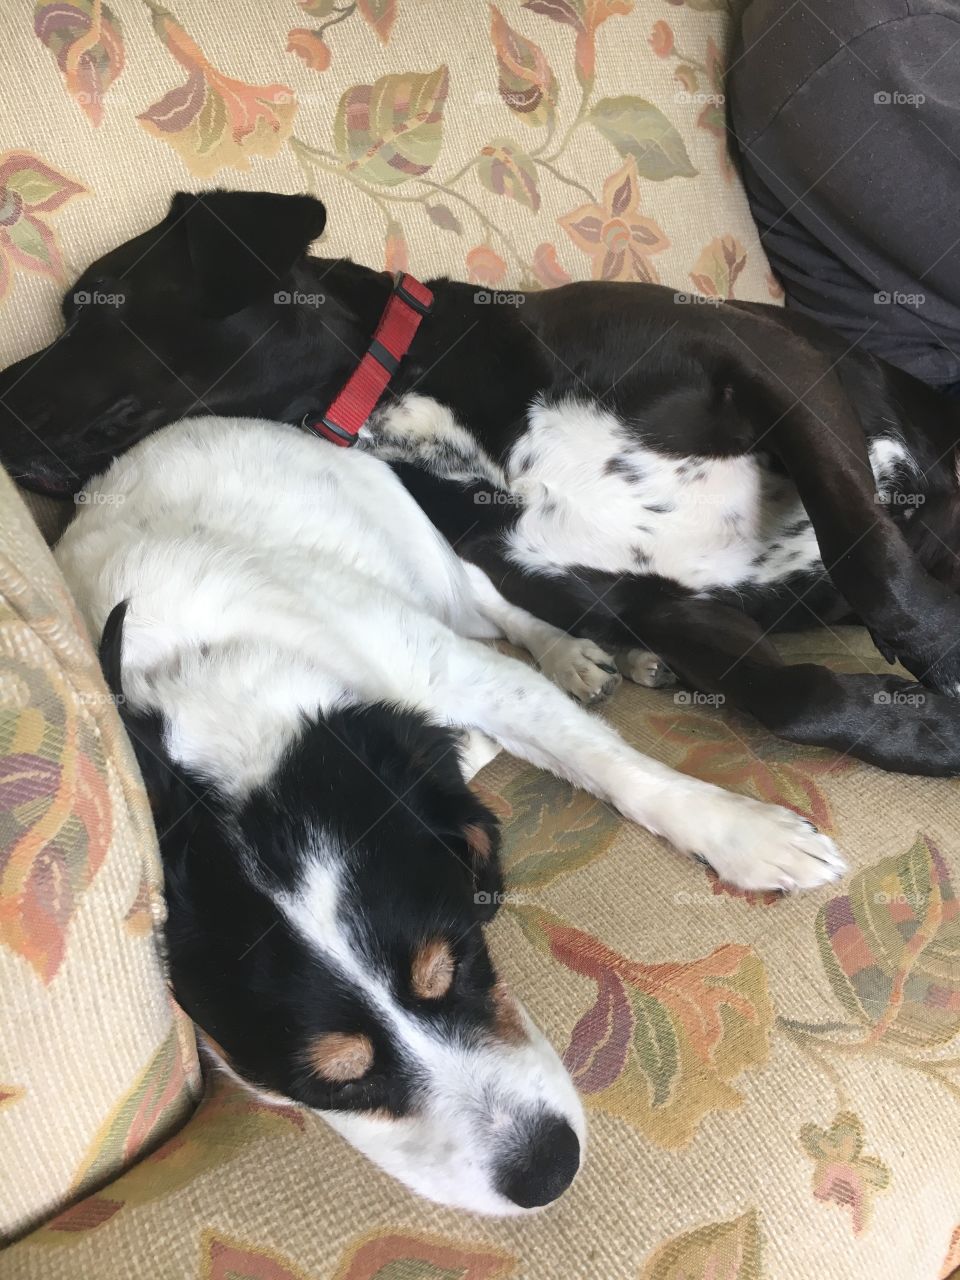 two dogs sleeping together